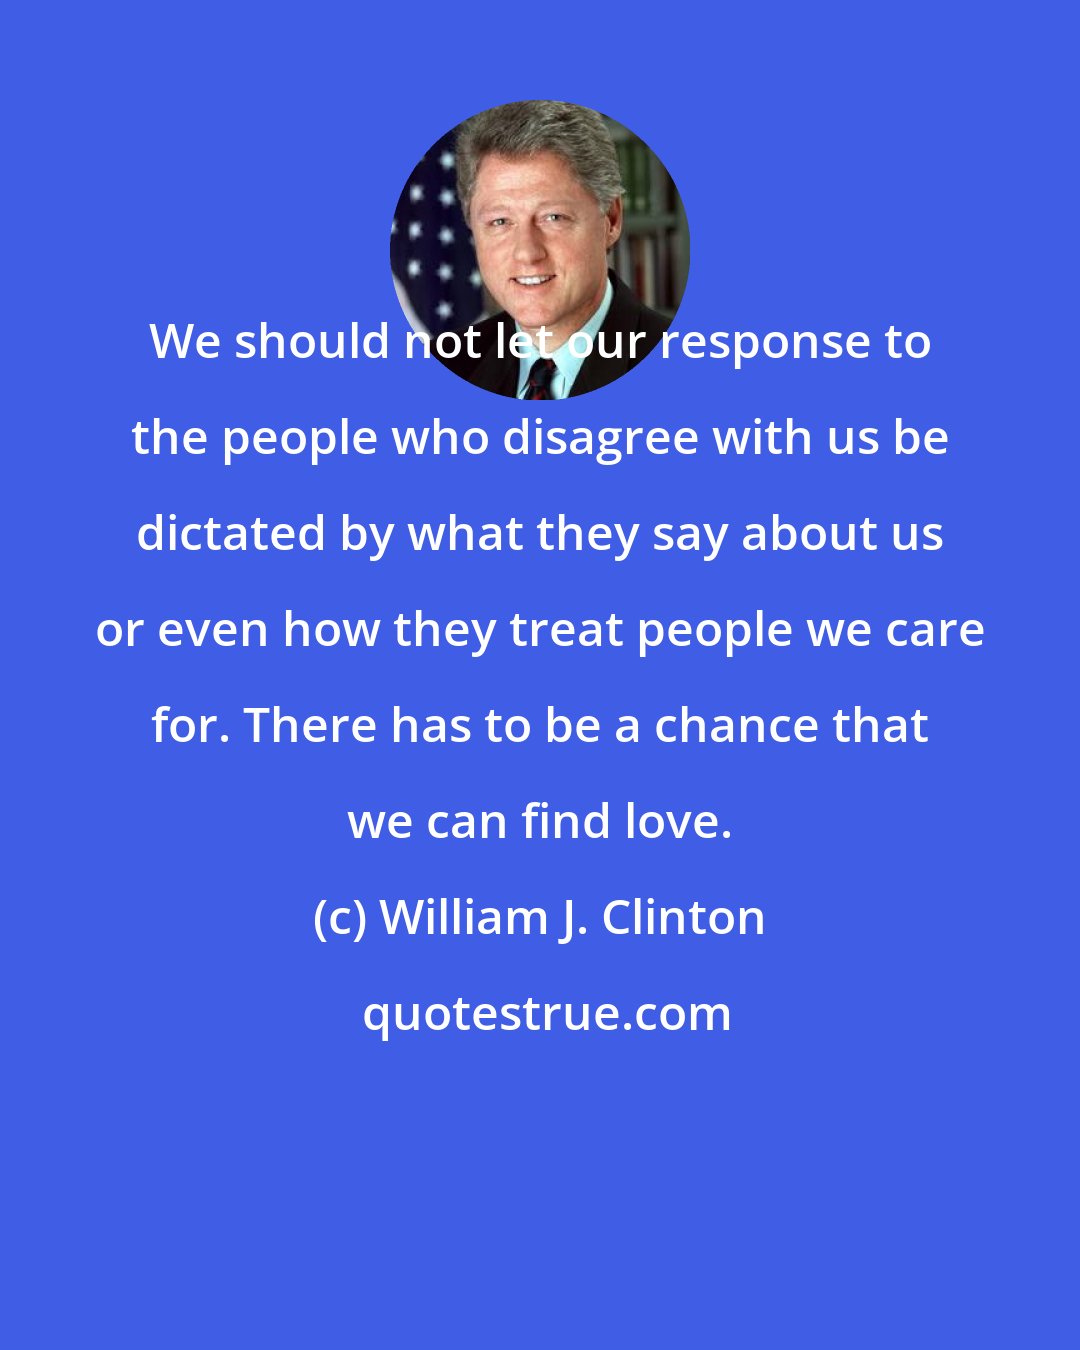 William J. Clinton: We should not let our response to the people who disagree with us be dictated by what they say about us or even how they treat people we care for. There has to be a chance that we can find love.